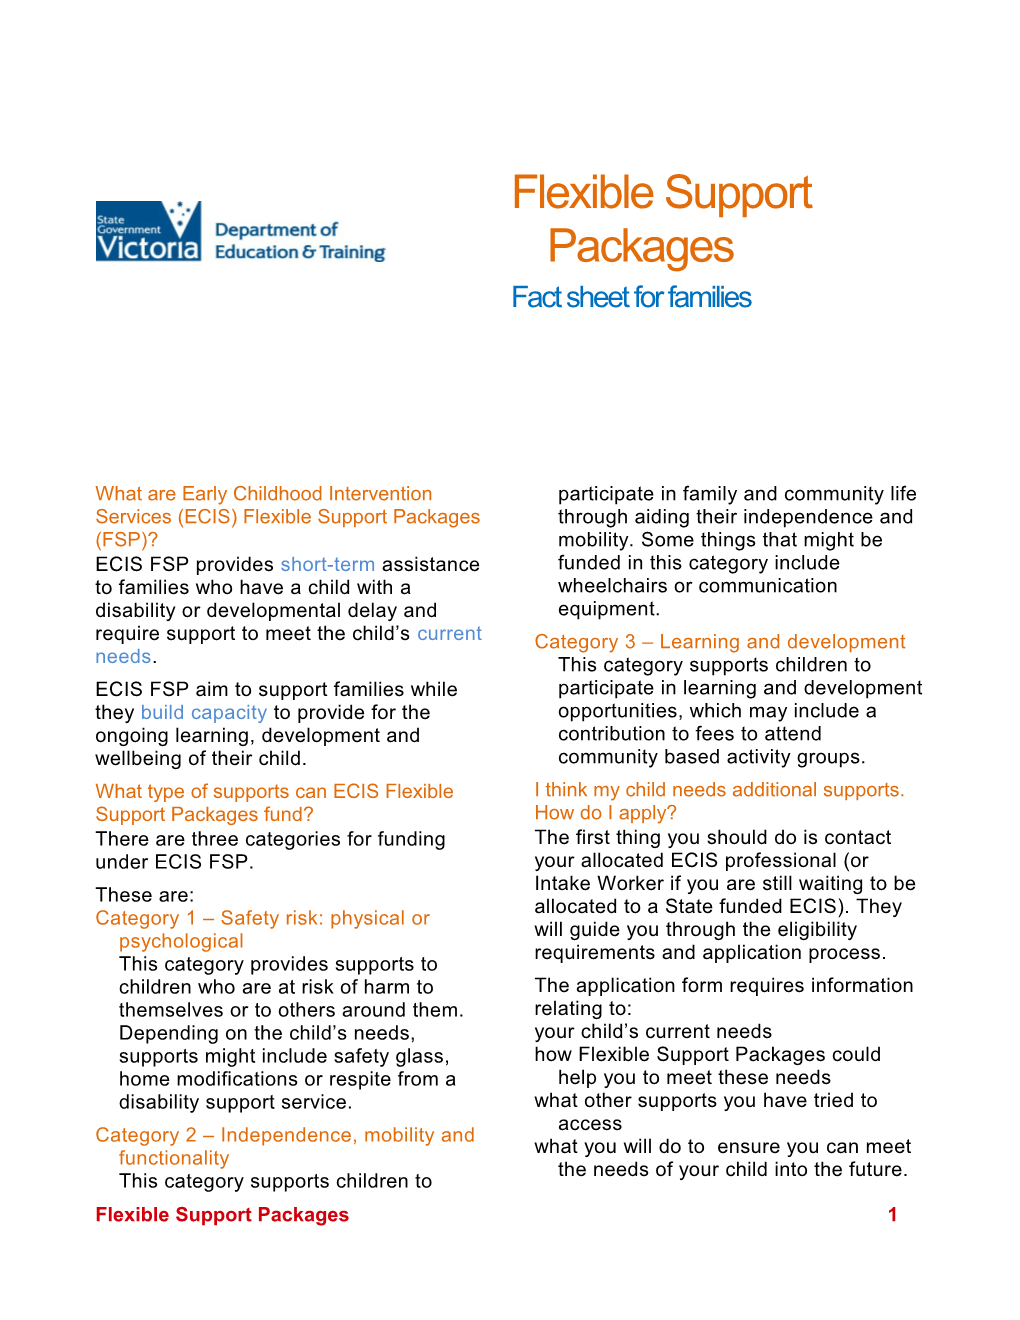 Fact Sheet for Families